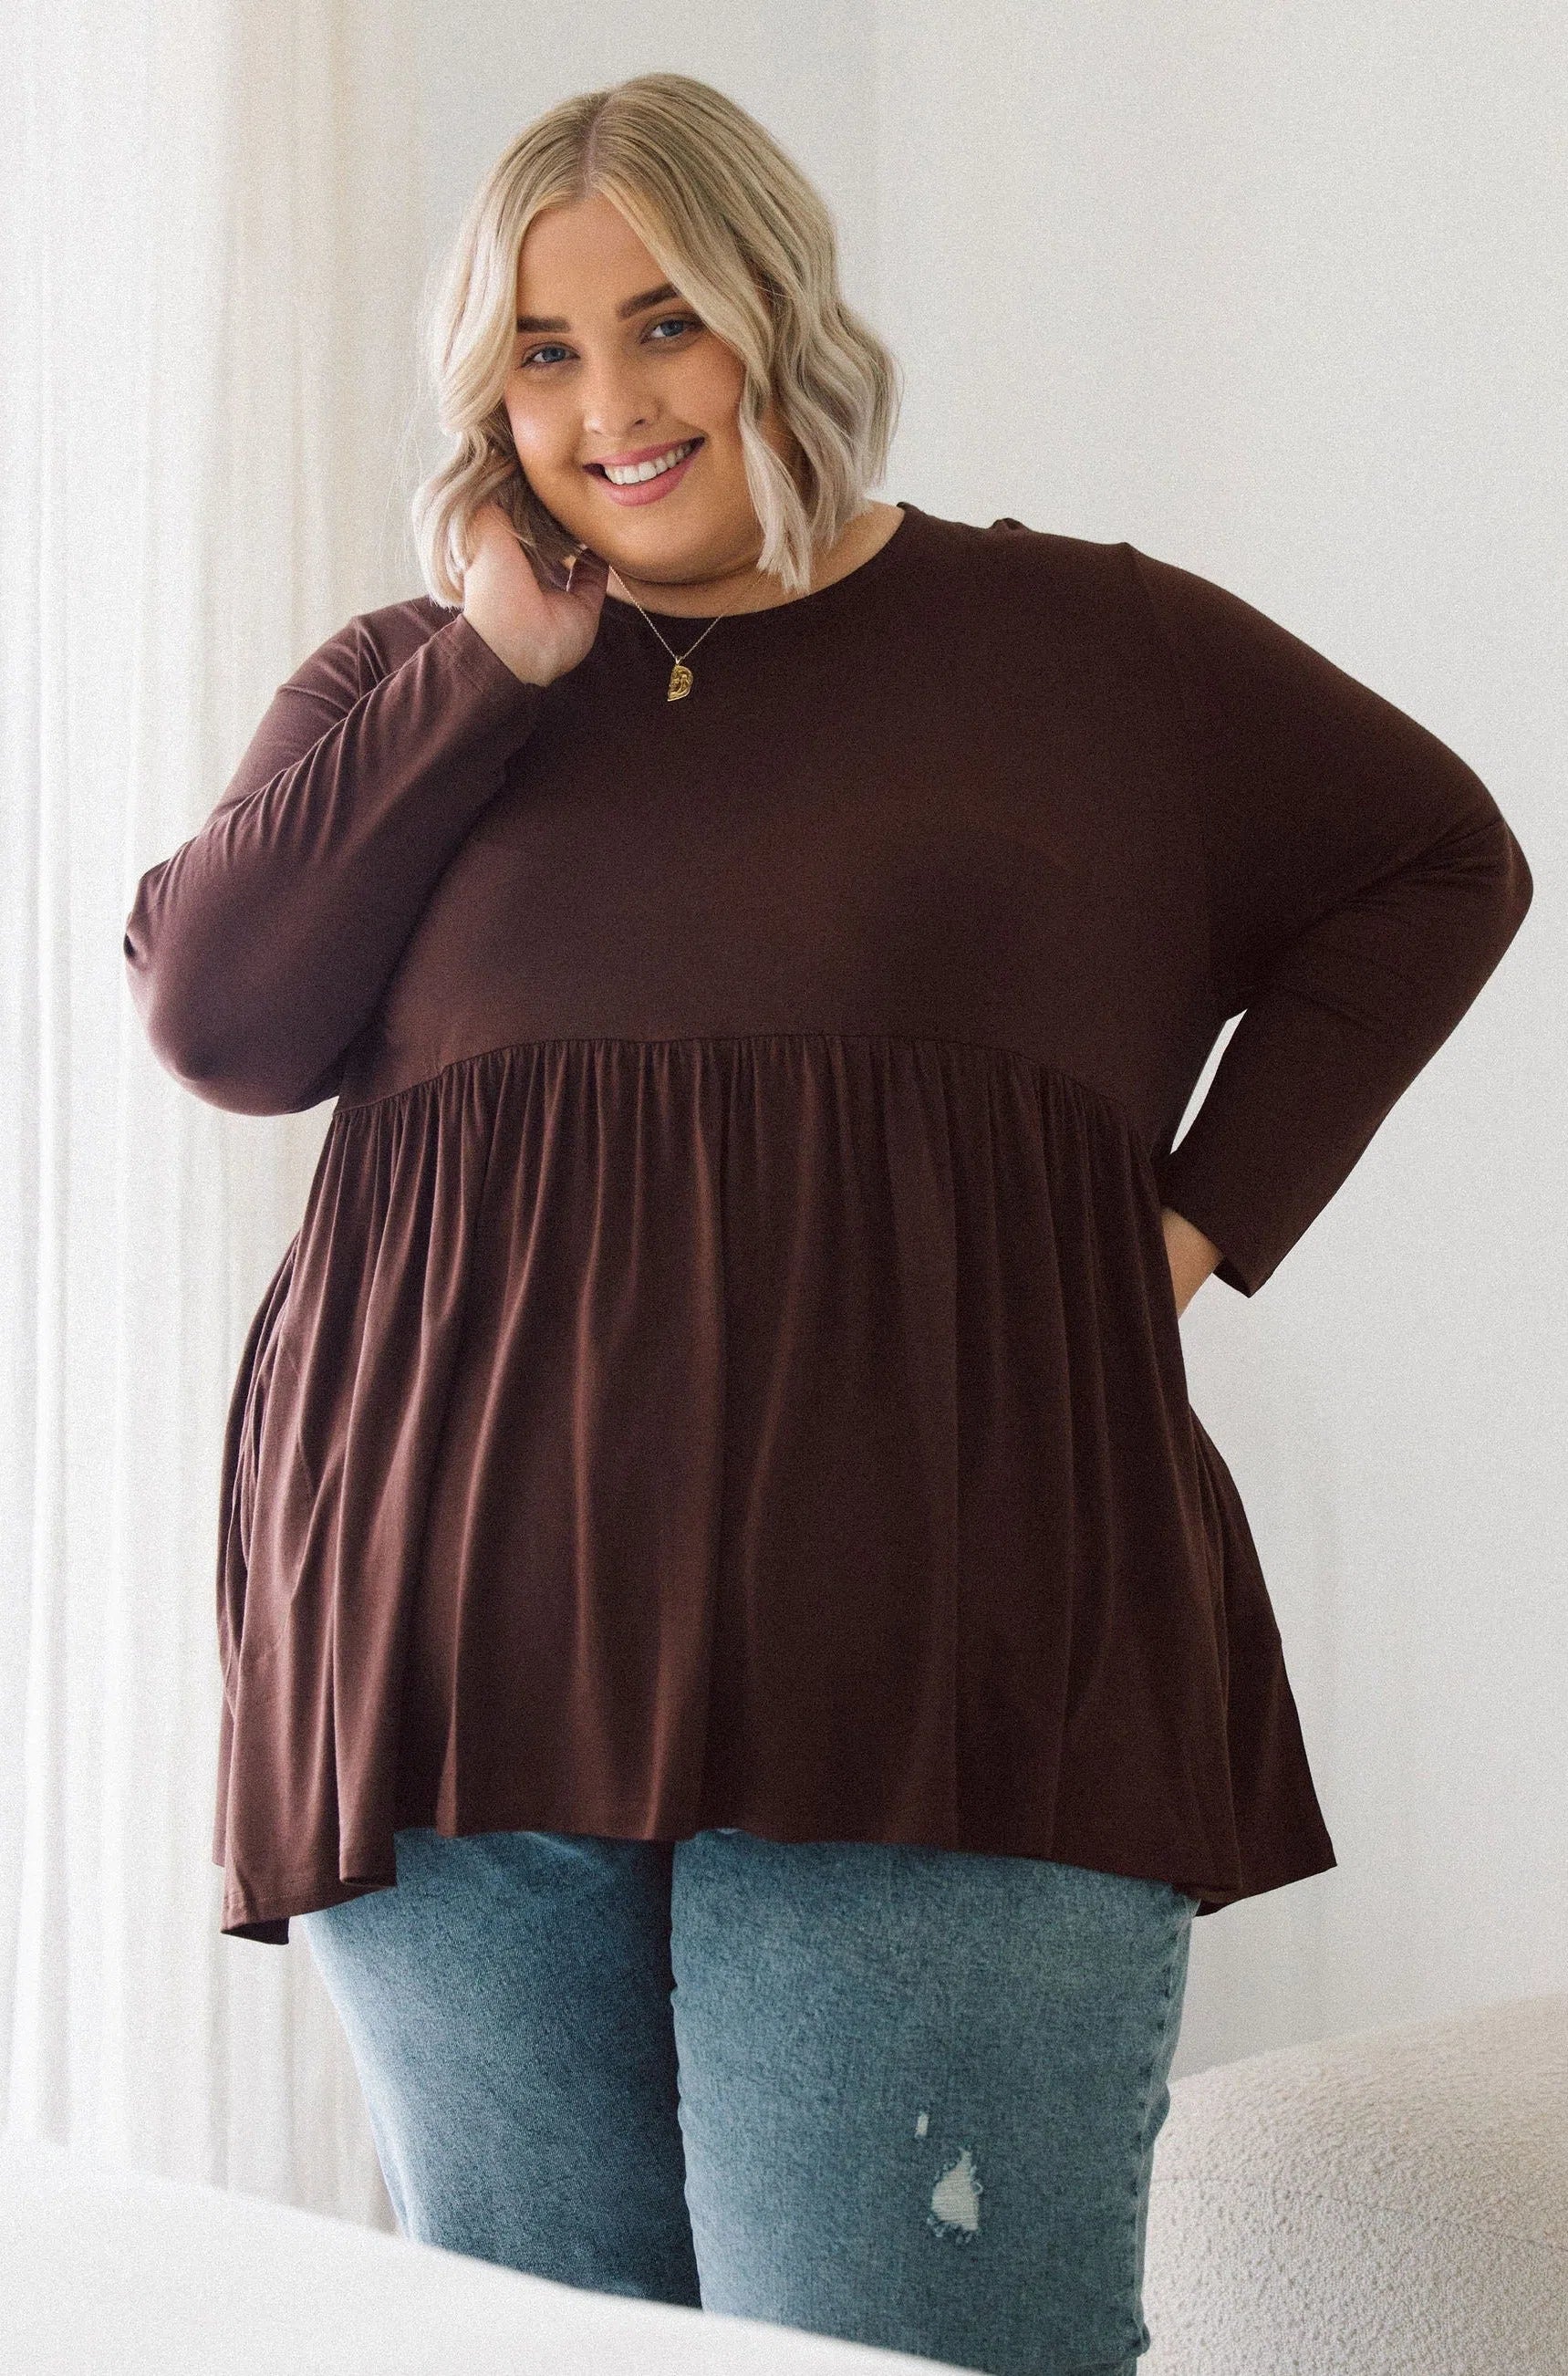 Plus Size clothing,  women modeling a Winter Plus Size Top - Stay Cozy with Lucy Long Sleeve Top in Chocolate